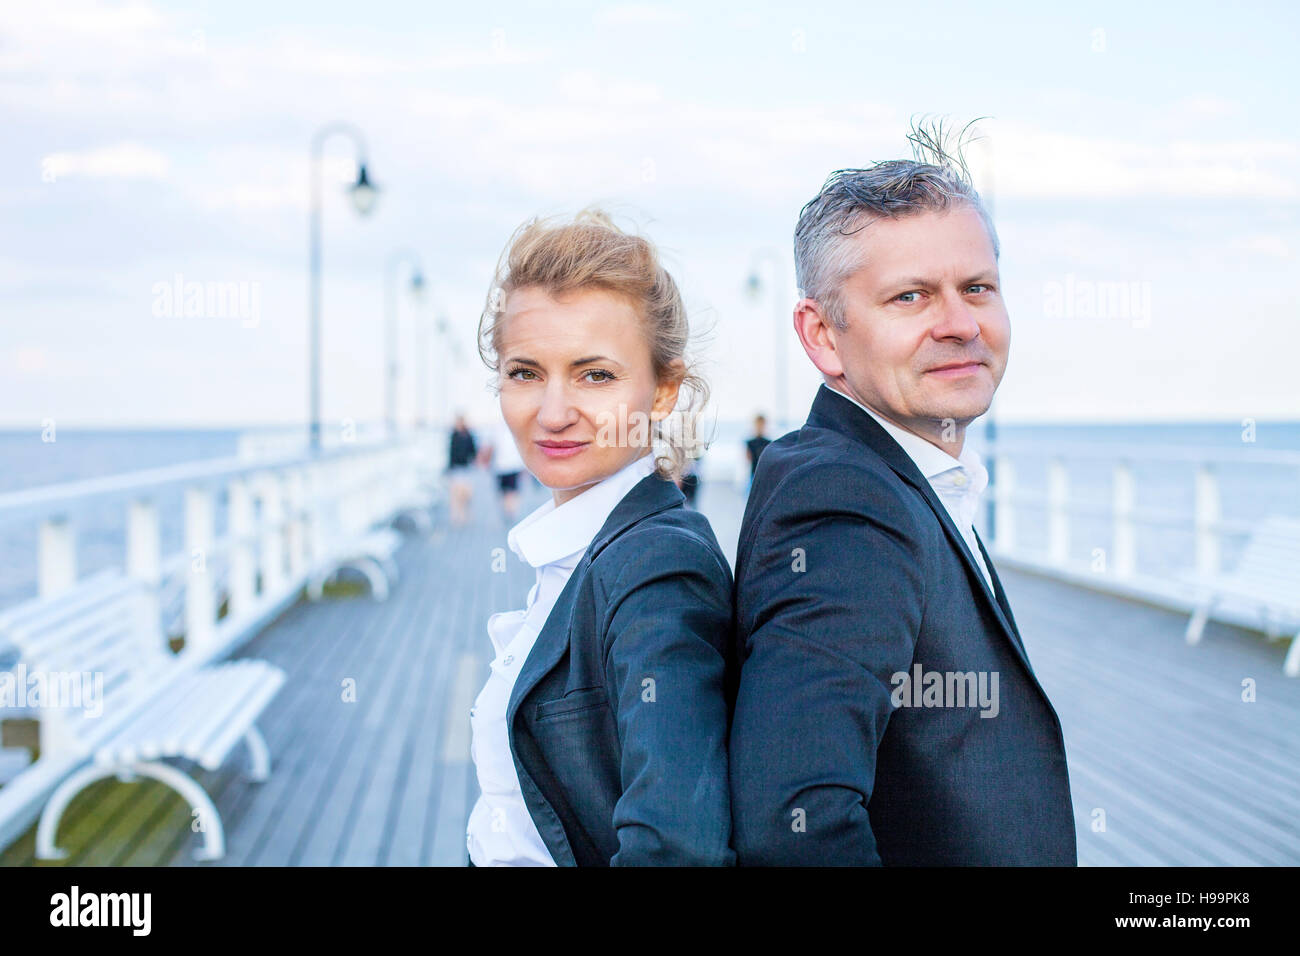 Two business people on jetty with hands on hips Stock Photo